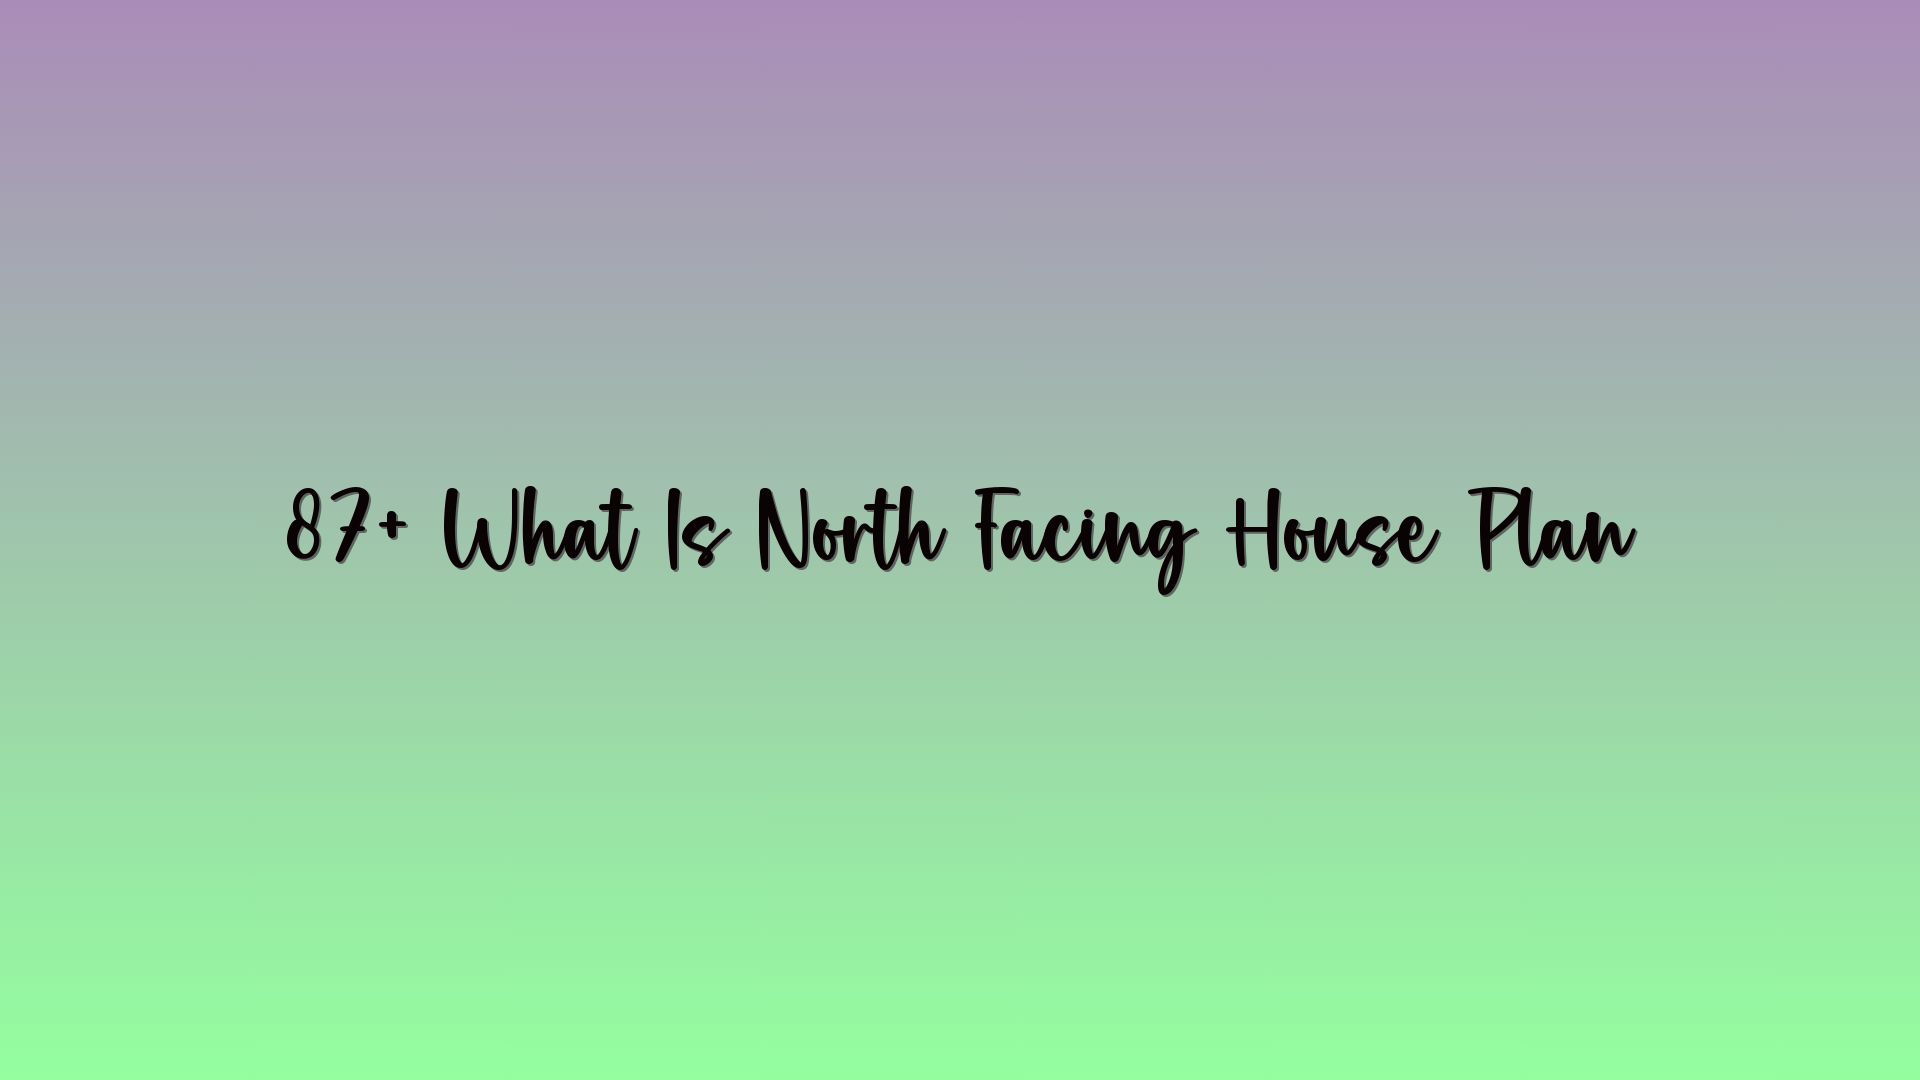 87+ What Is North Facing House Plan